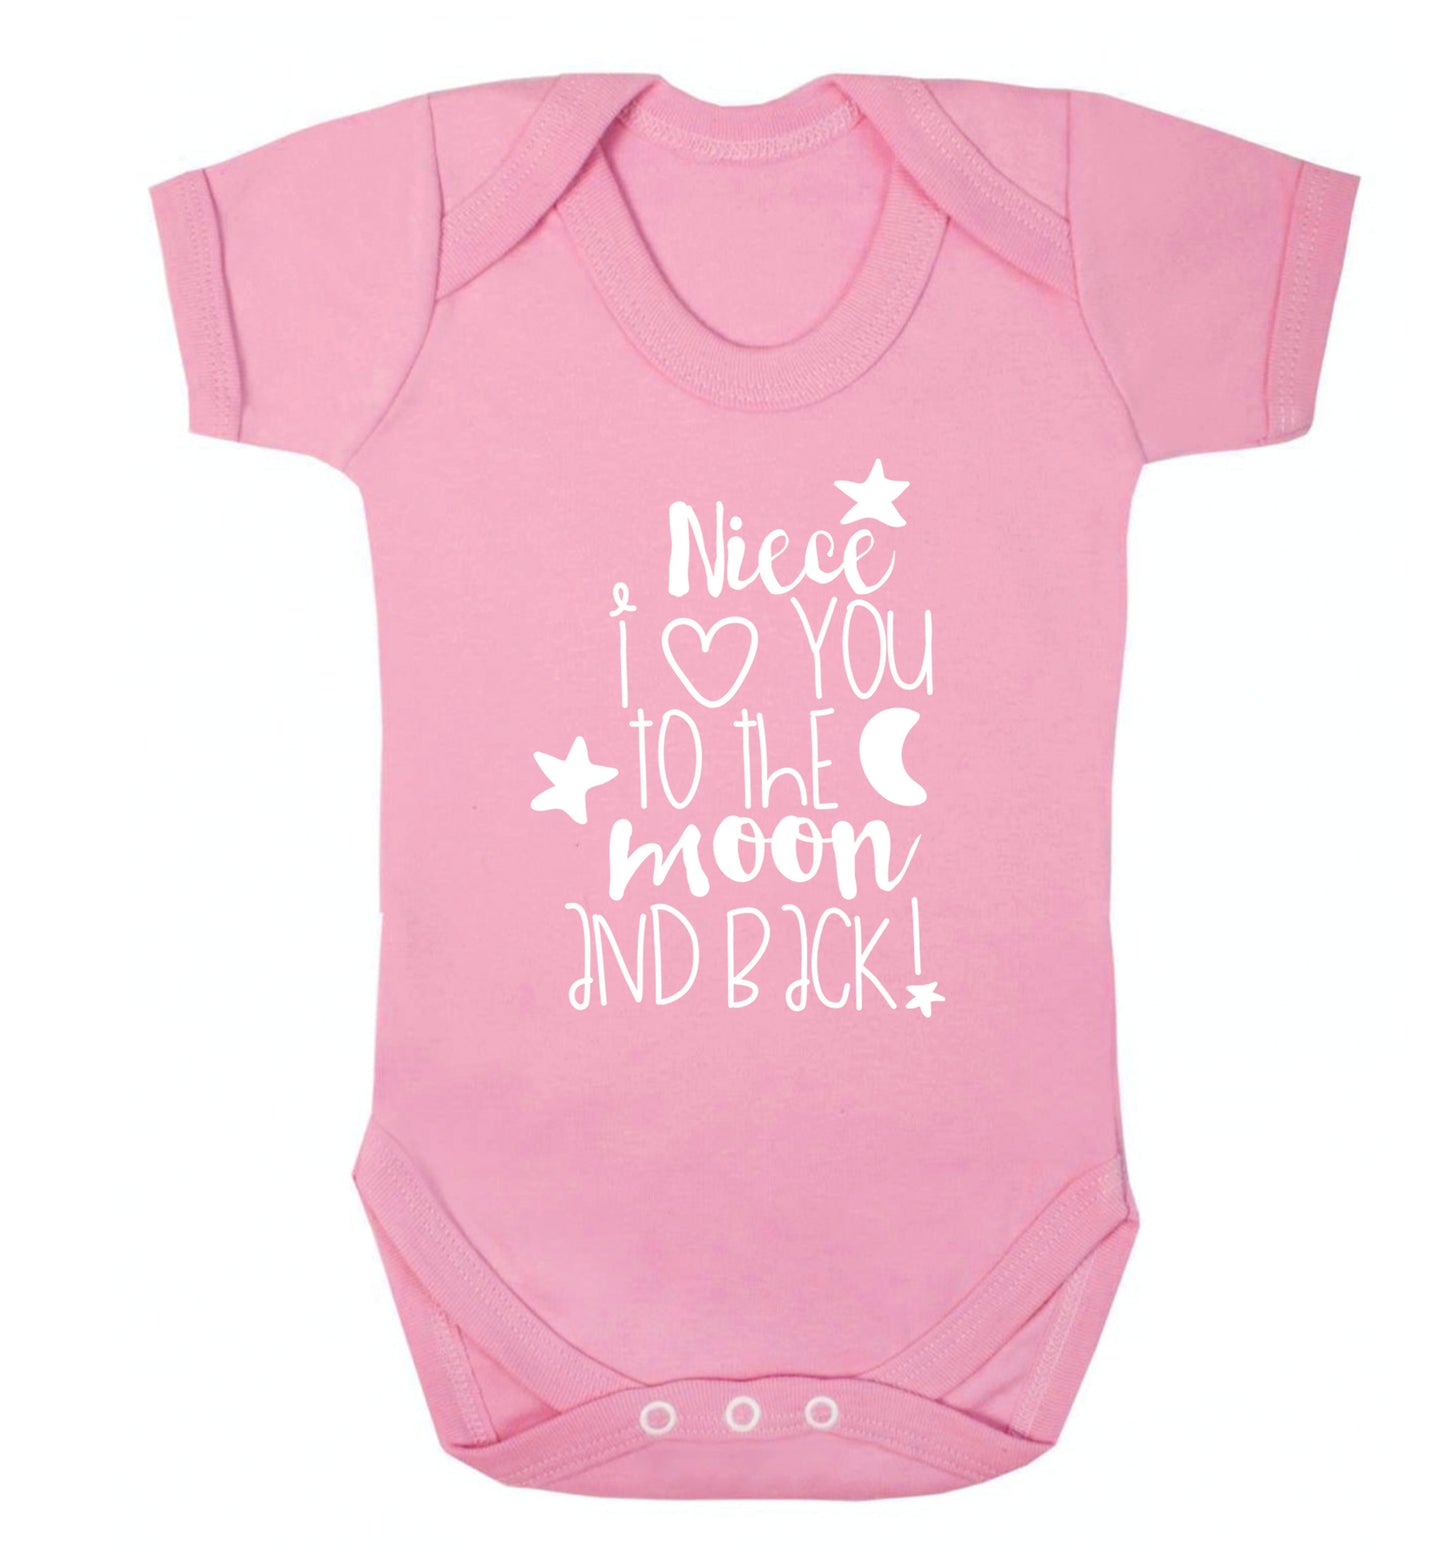 Niece I love you to the moon and back Baby Vest pale pink 18-24 months